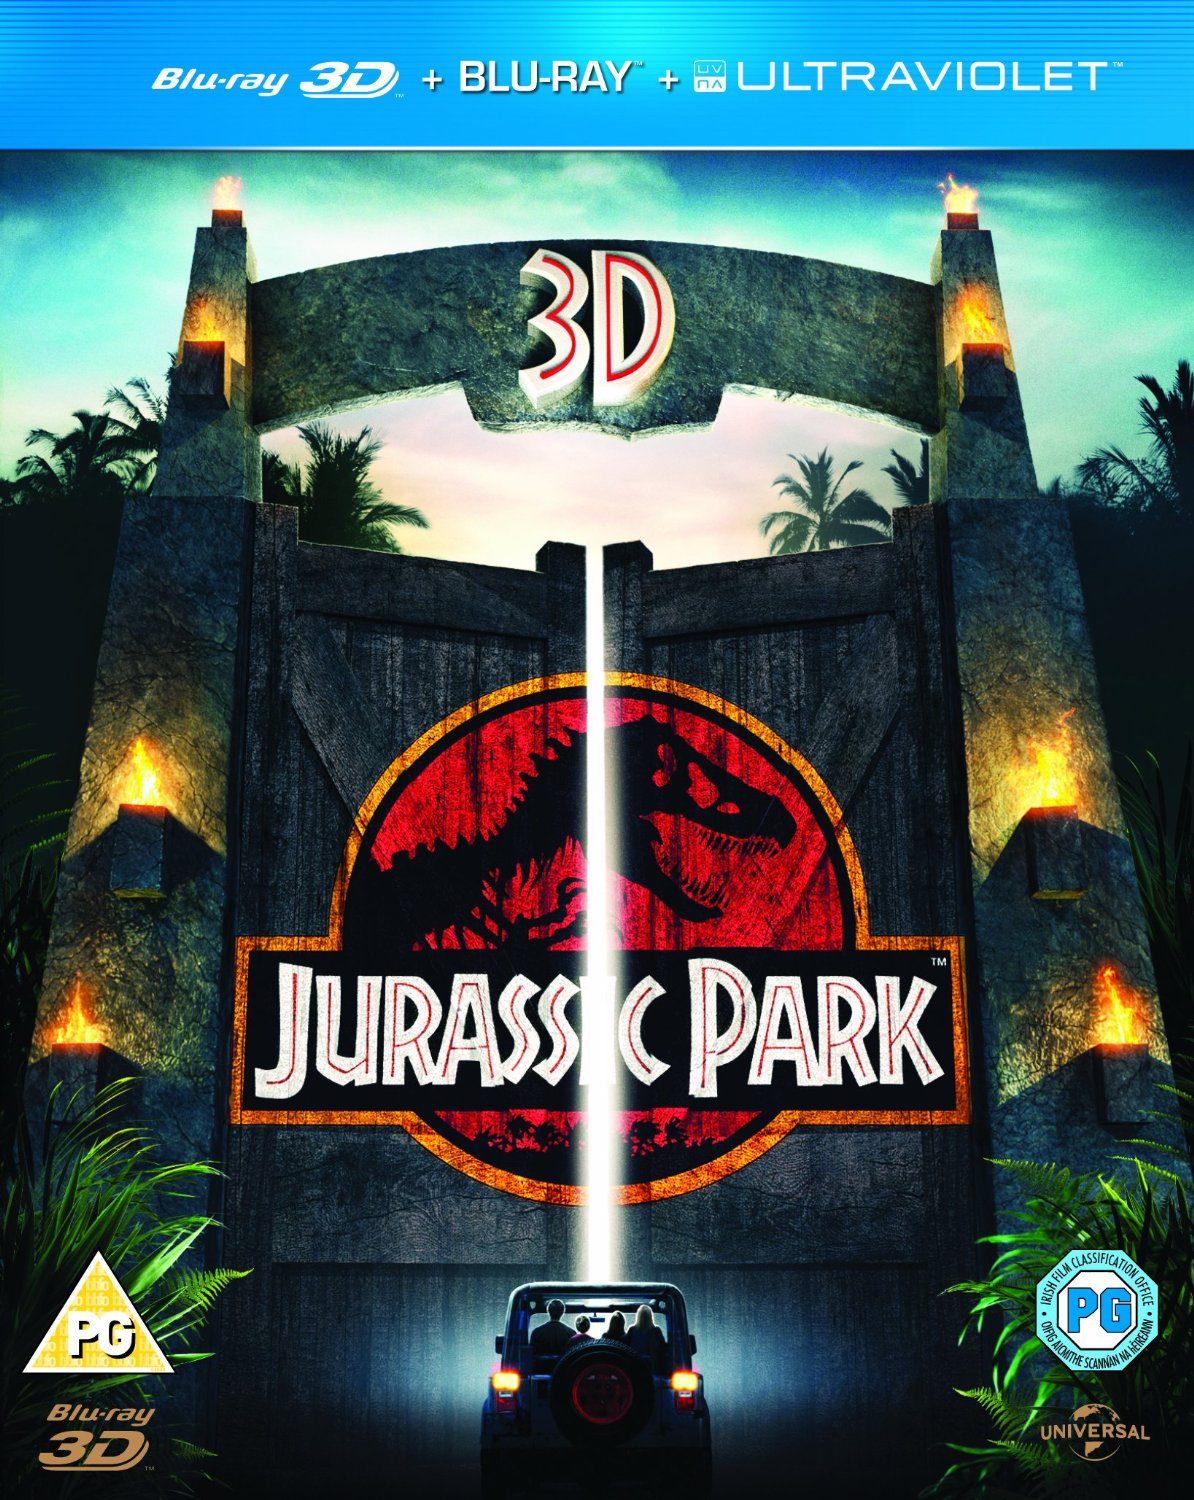 boom competitions - win a copy of Jurassic Park 3D on Blu-ray